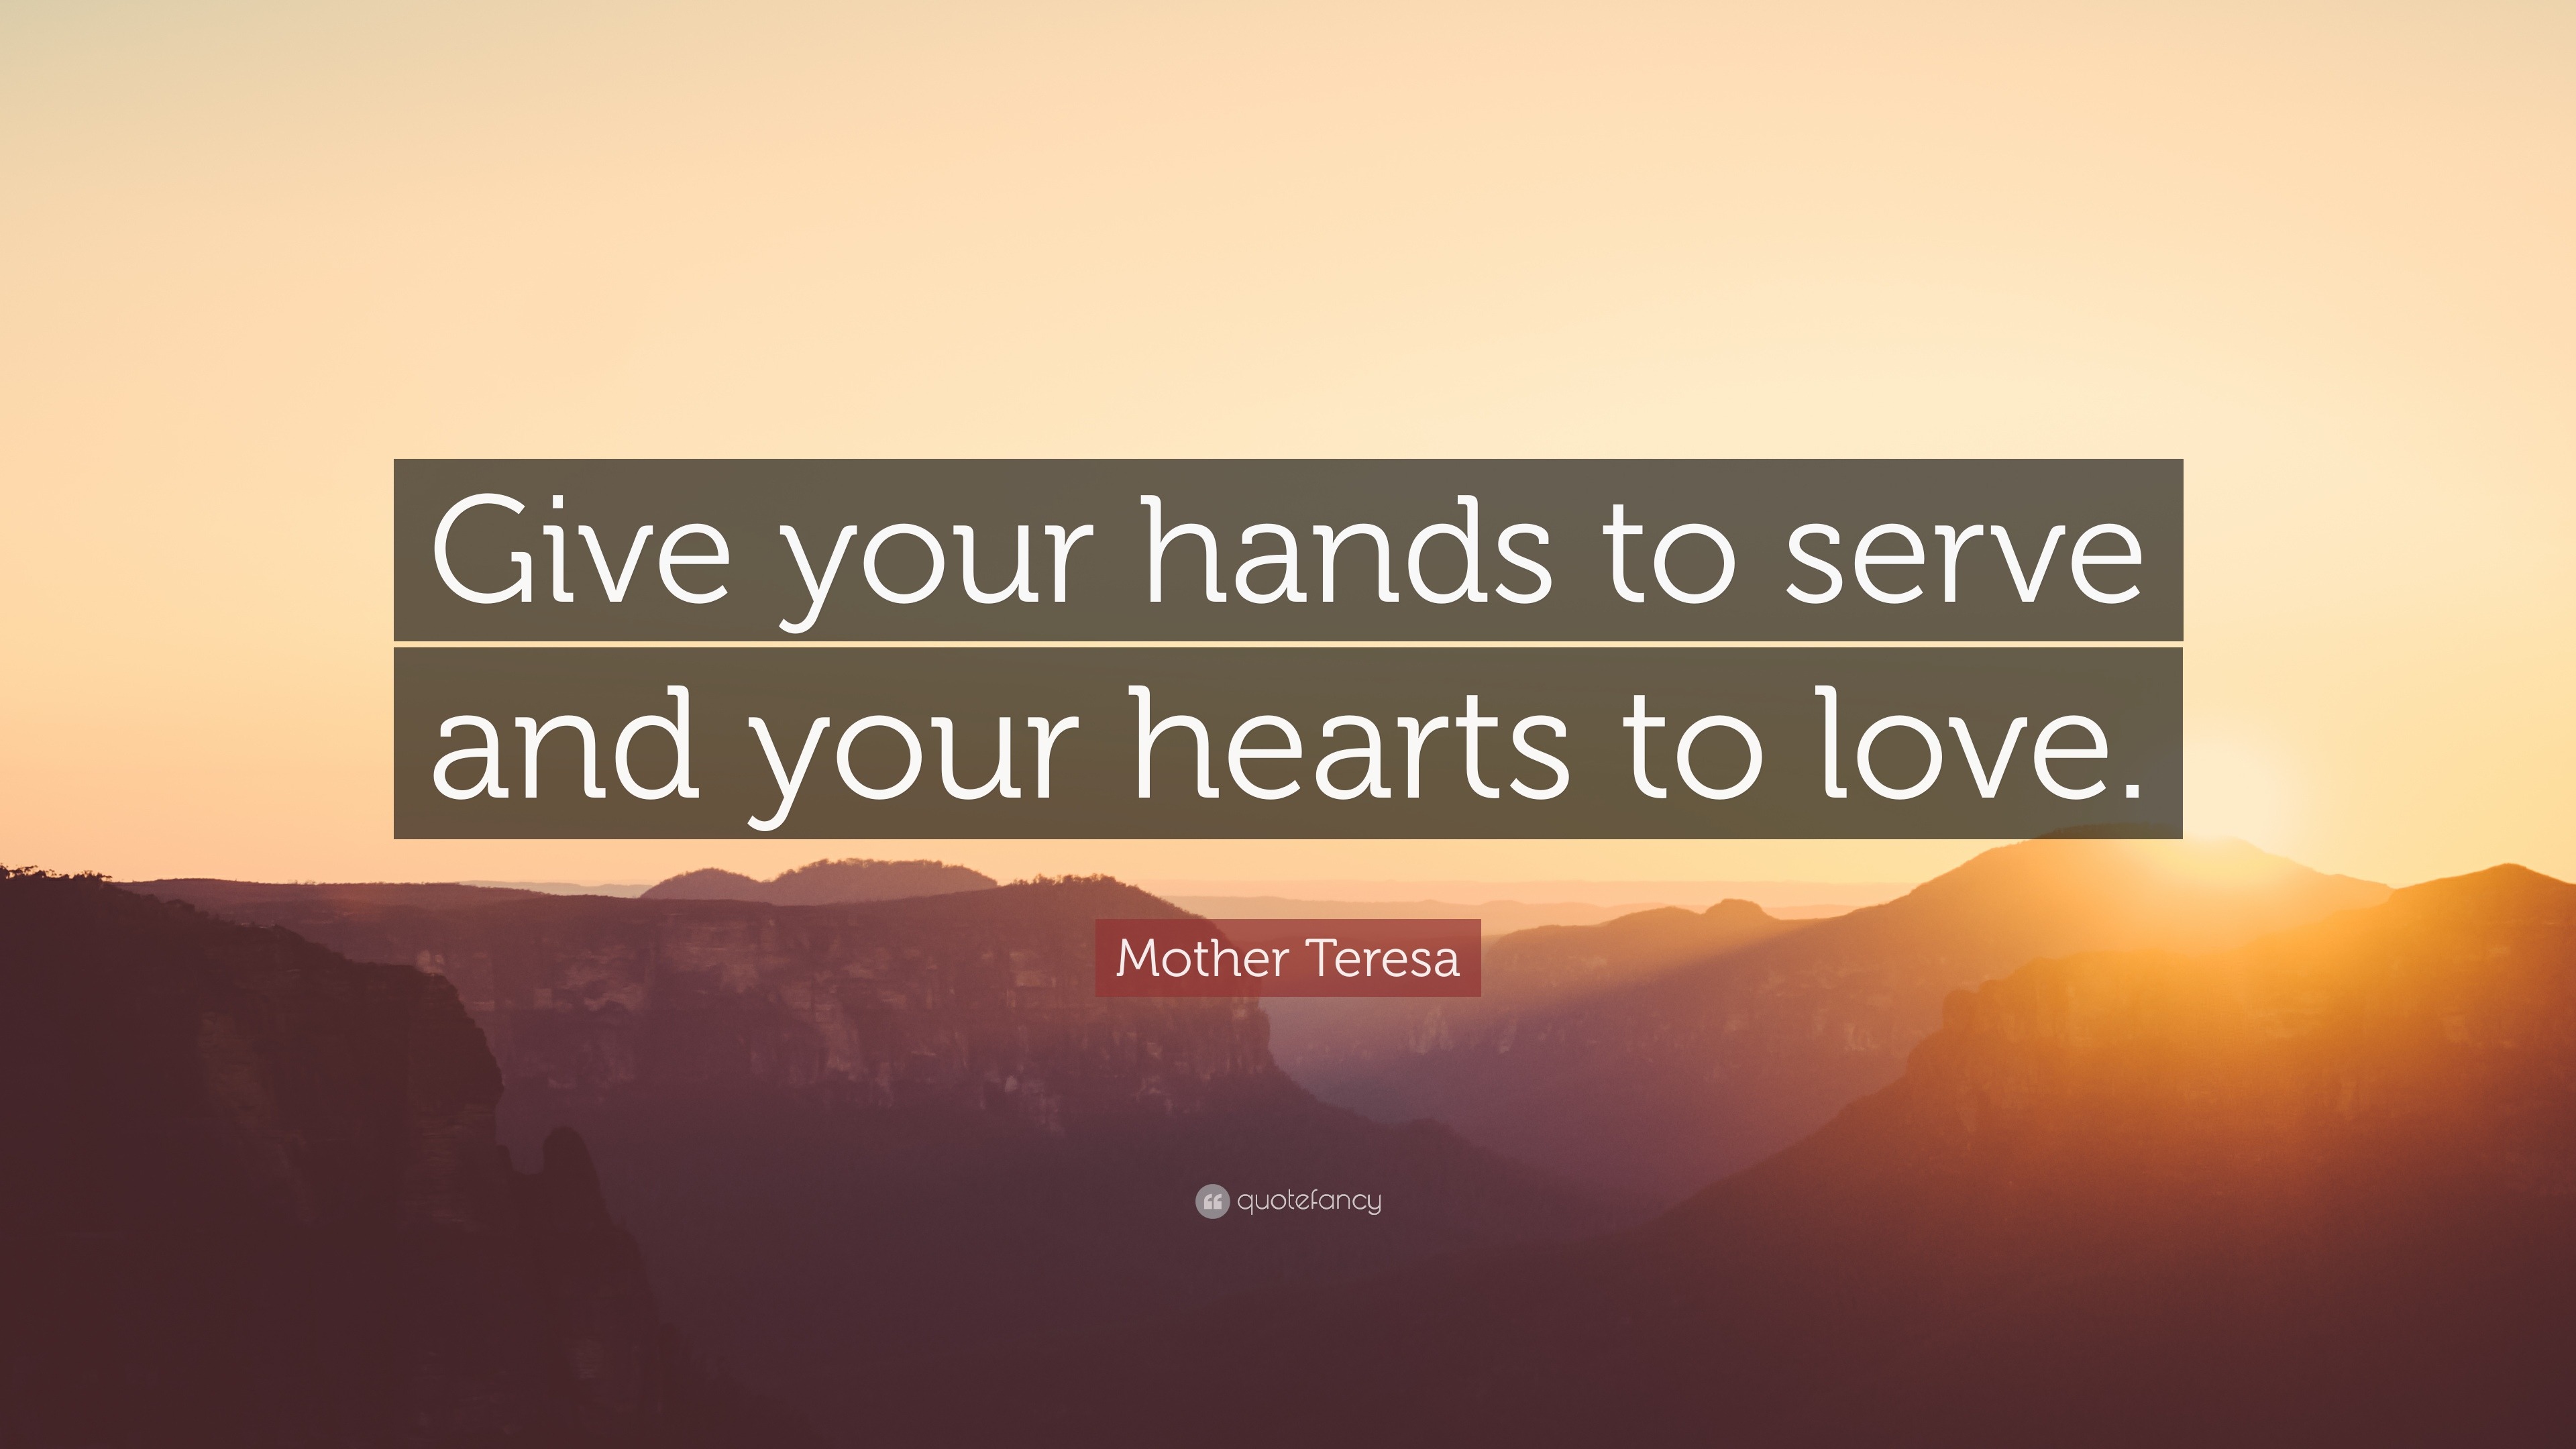 Mother Teresa Quote “Give your hands to serve and your hearts to love